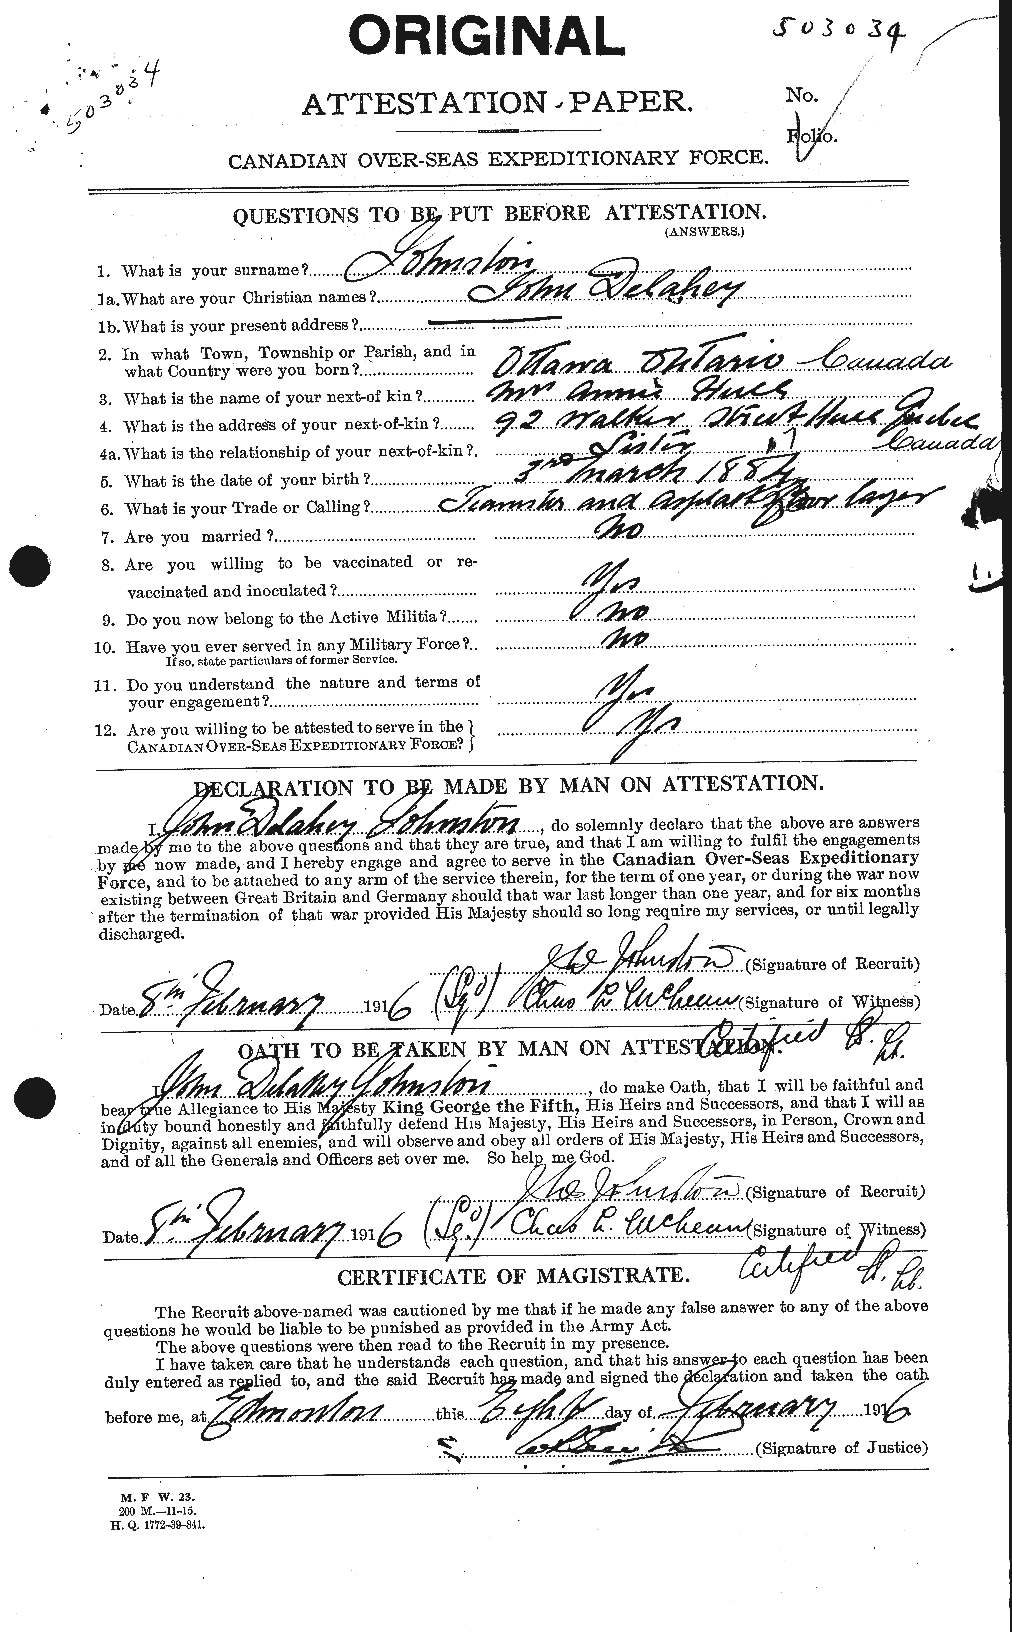 Personnel Records of the First World War - CEF 422821a